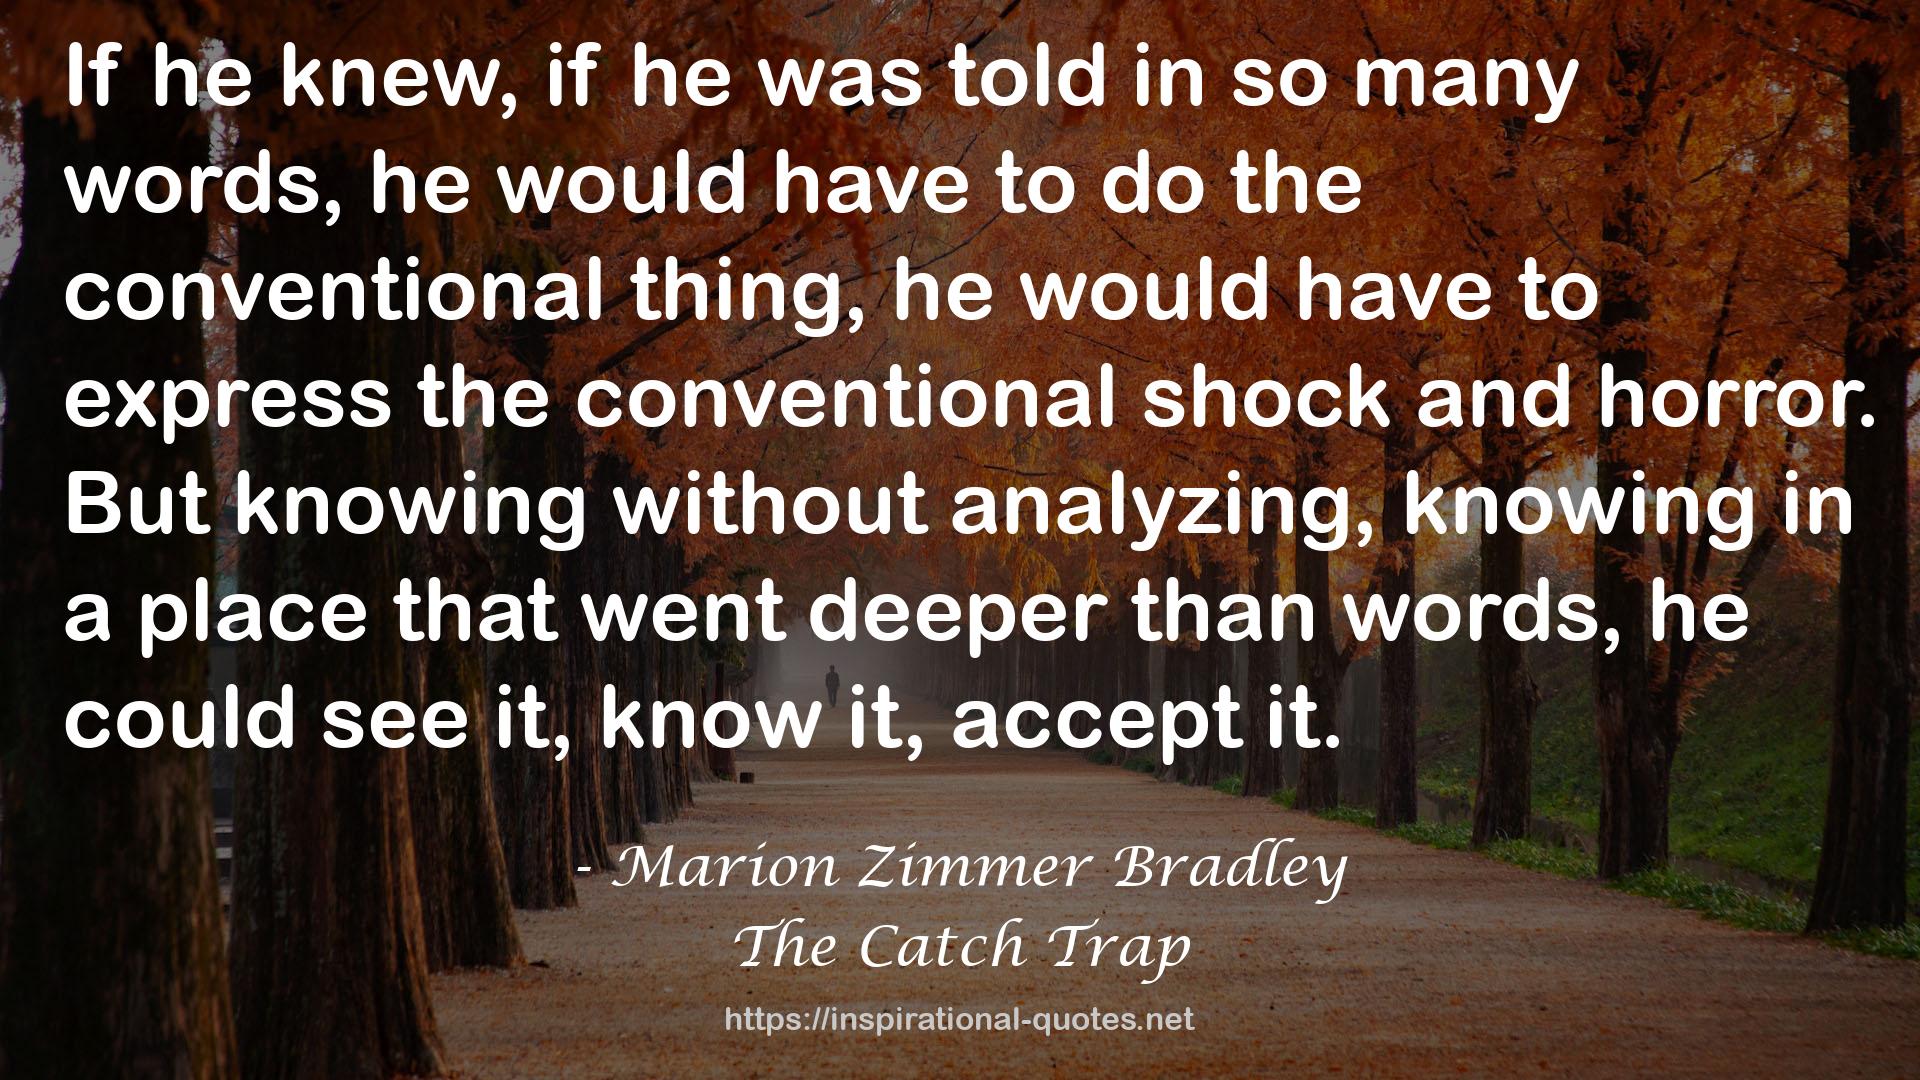 The Catch Trap QUOTES